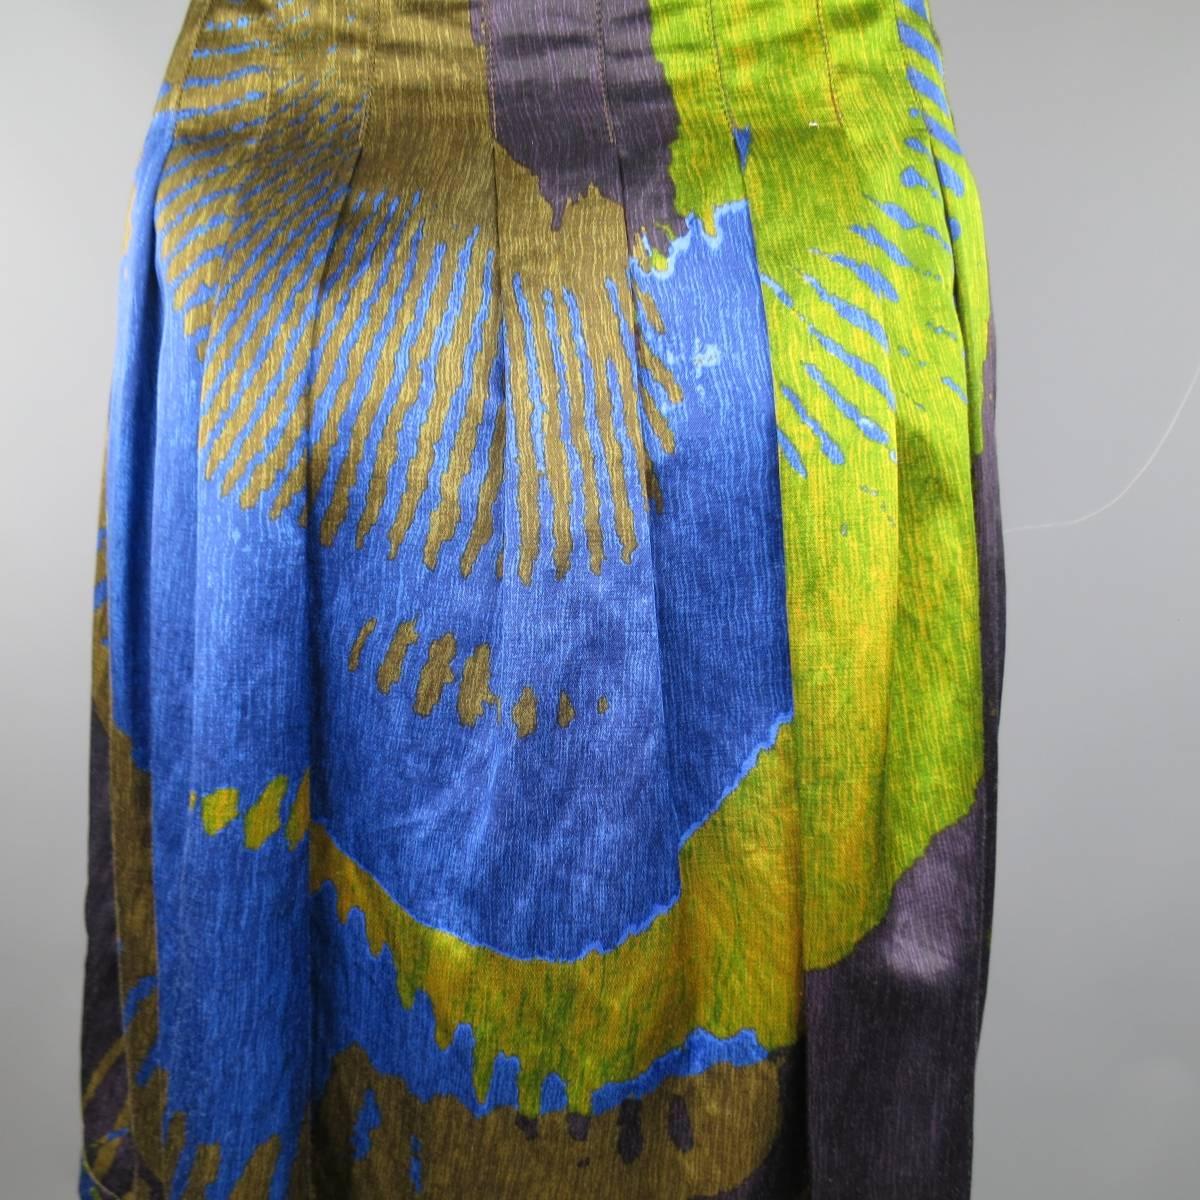 ETRO Skirt - Size 4 - Green & Blue Abstract Print Satin Pleated A Line Skirt 1